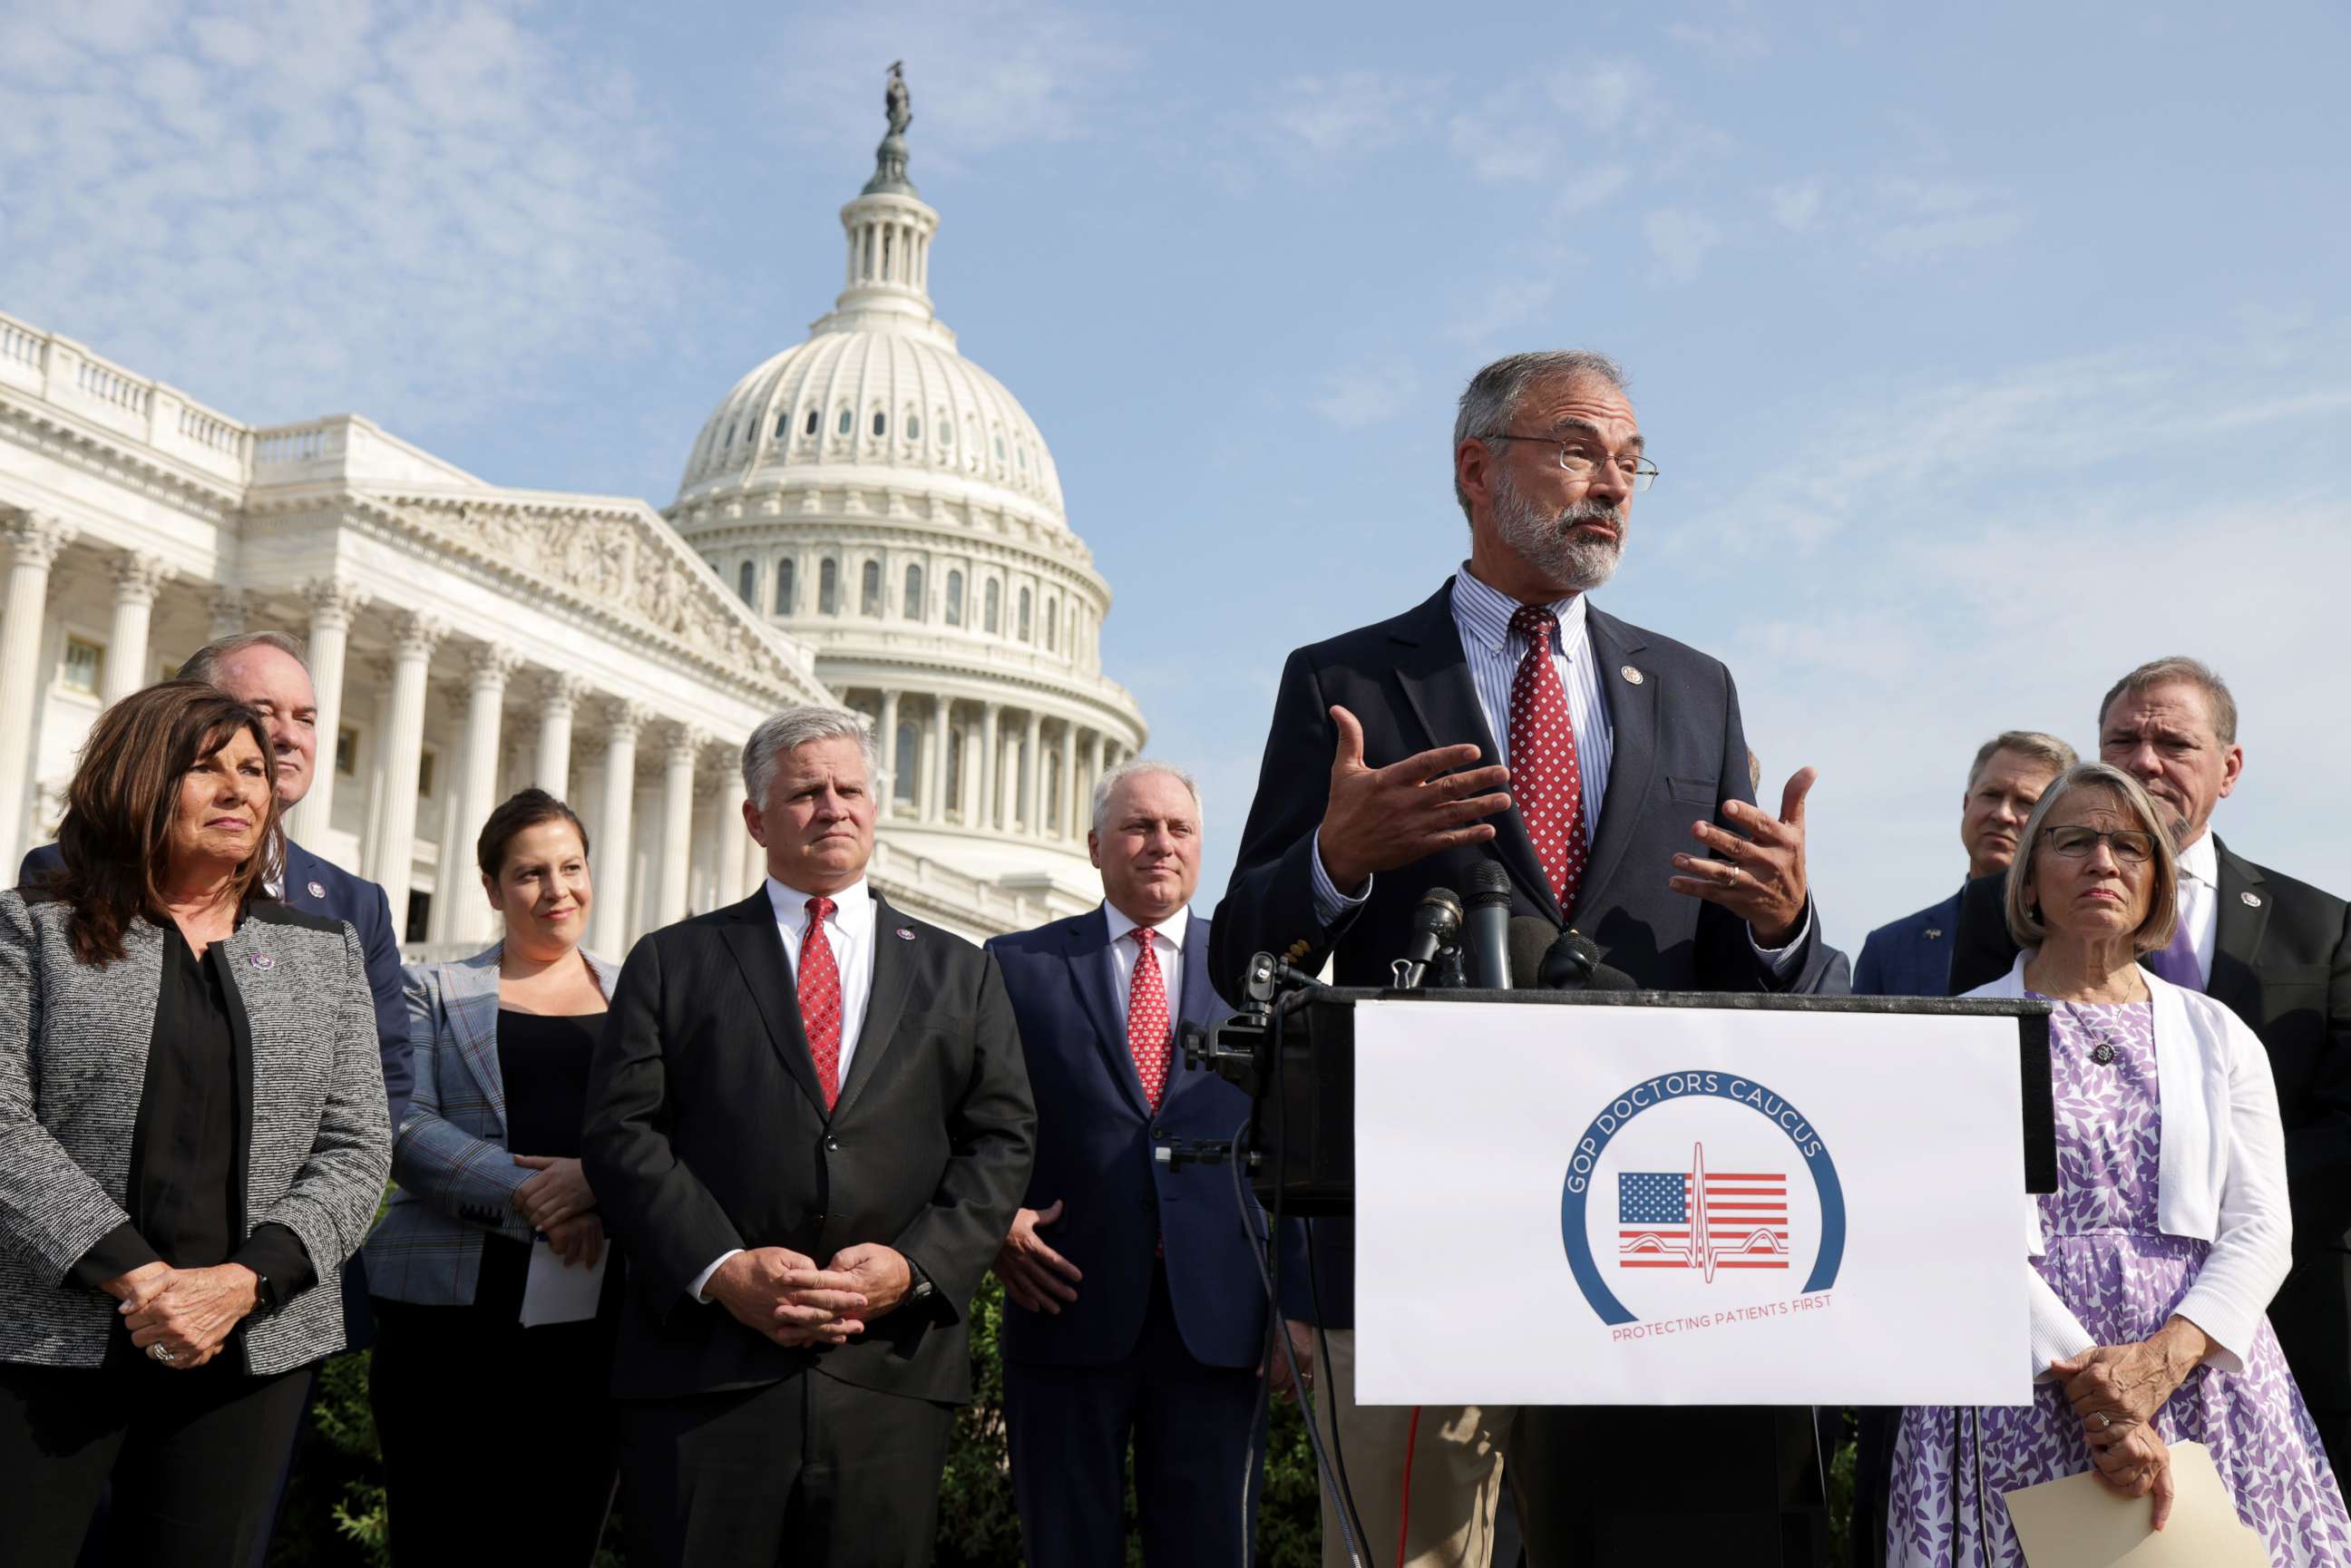 PHOTO: Rep. Andy Harris speaks as House Minority Whip Rep. Steve Scalise, House Republican Conference Chair Rep. Elise Stefanik and members of the GOP Doctors Caucus listen during a news conference in front of the Capitol, July 22, 2021, in Washington.